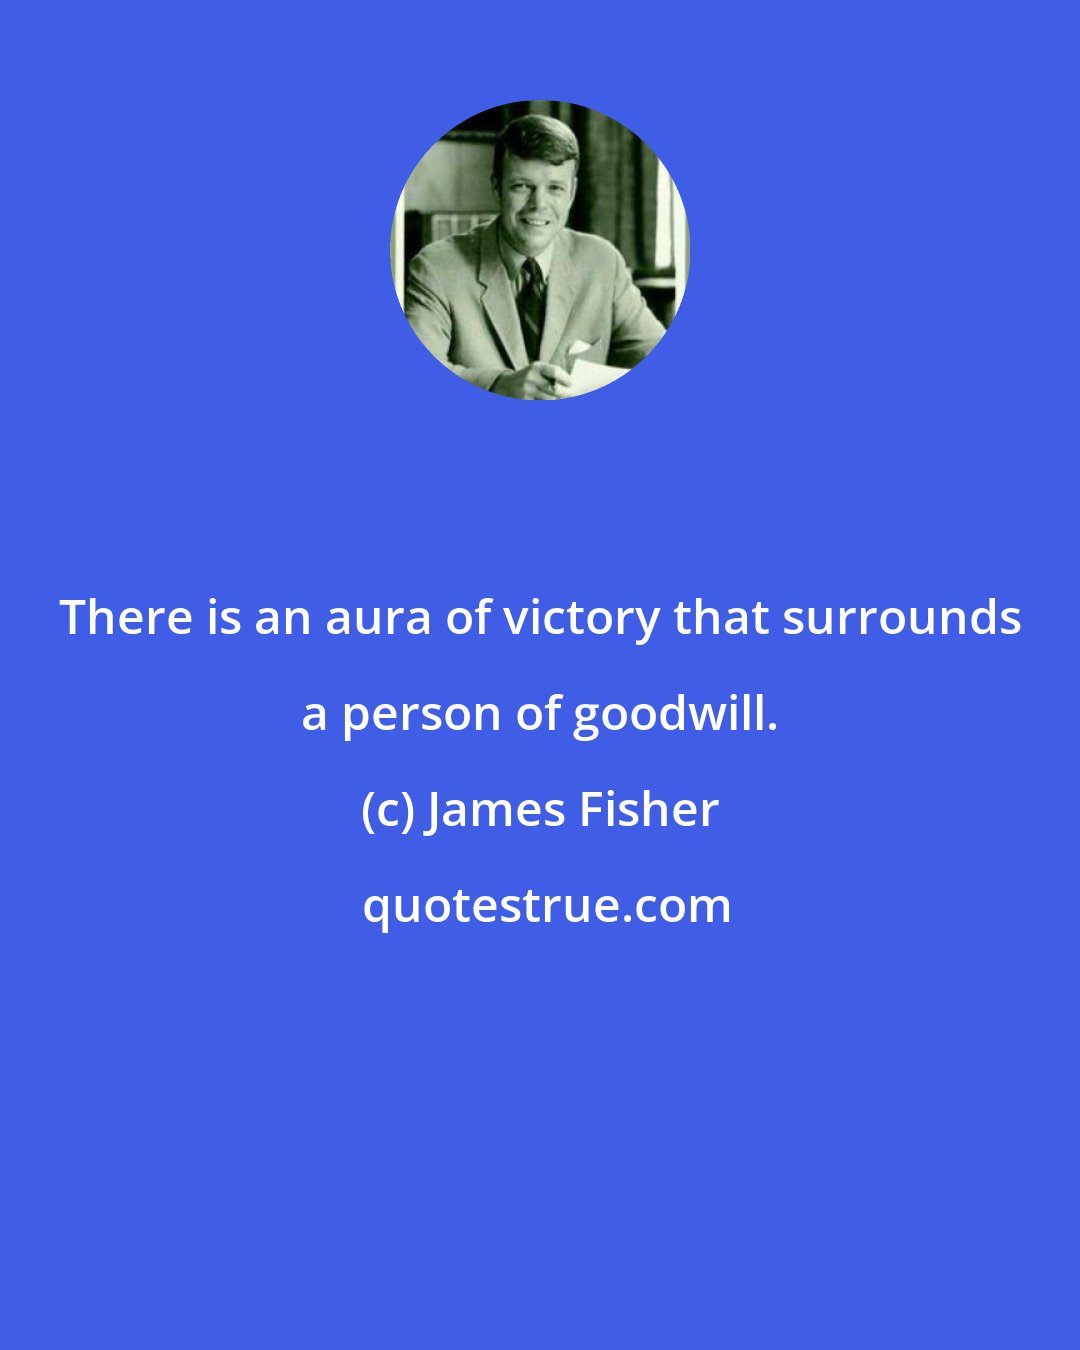 James Fisher: There is an aura of victory that surrounds a person of goodwill.